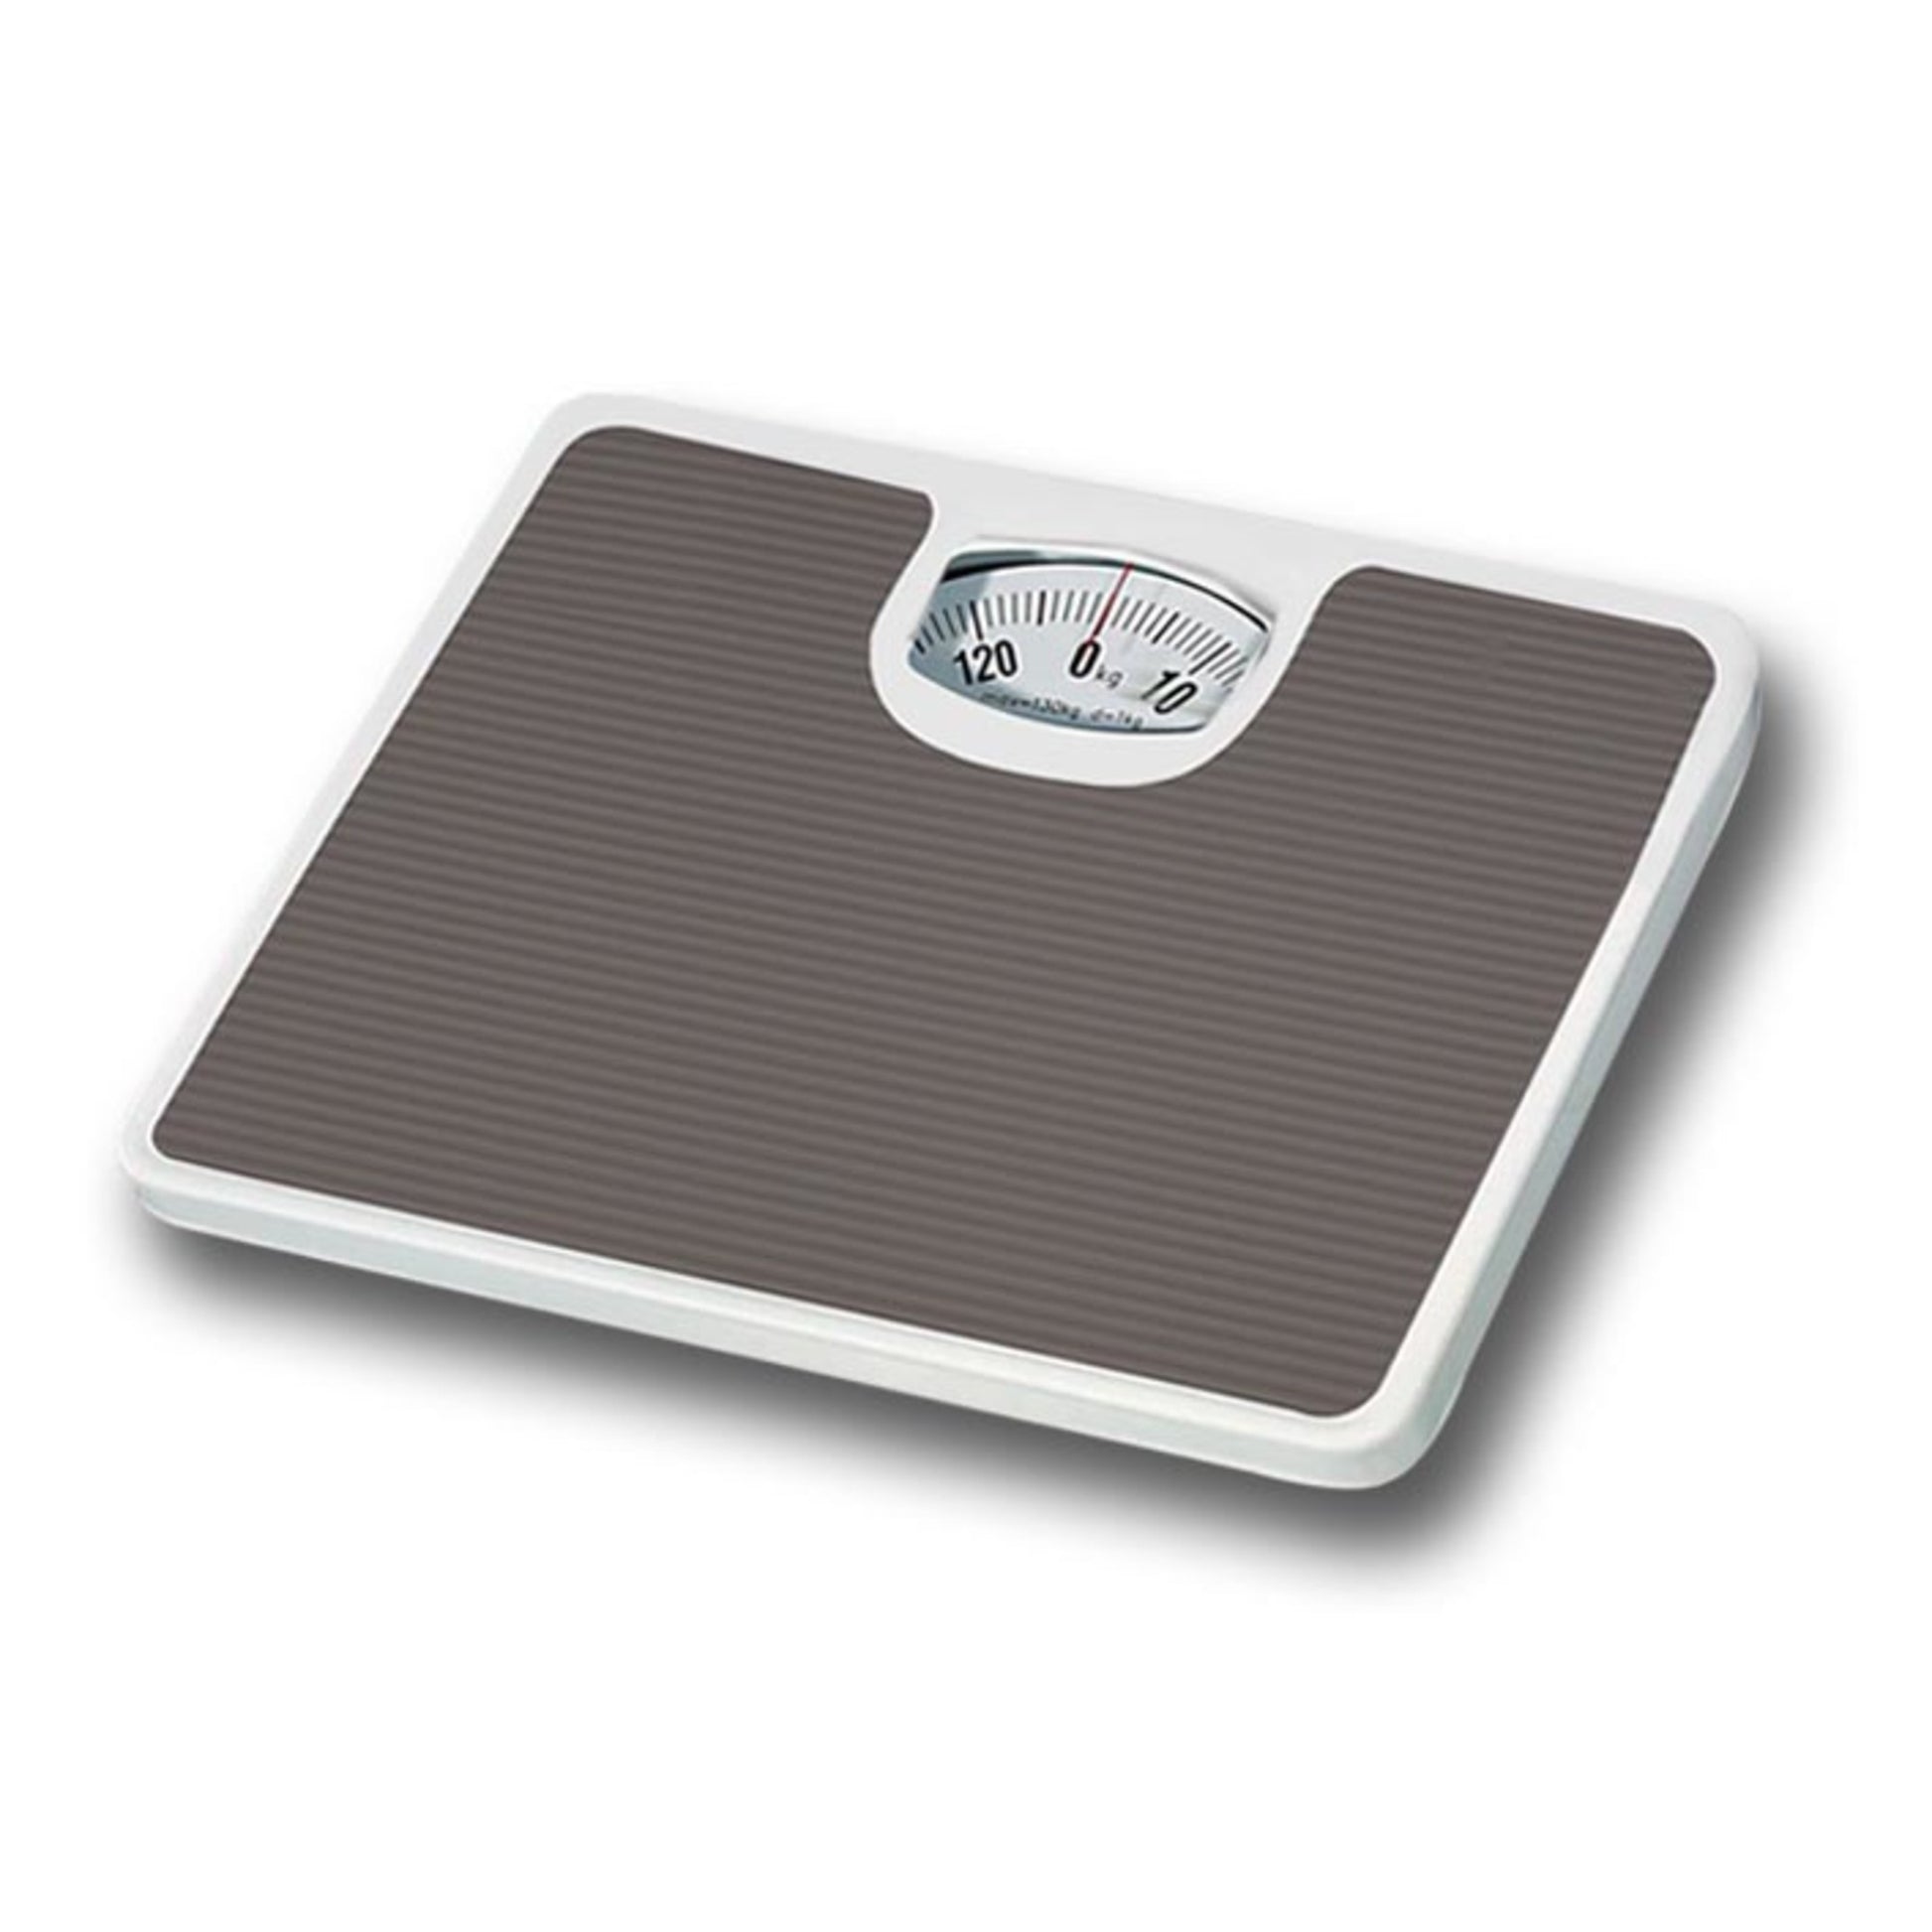 Digital Scale for Body Weight, Step-On Technology, High Capacity